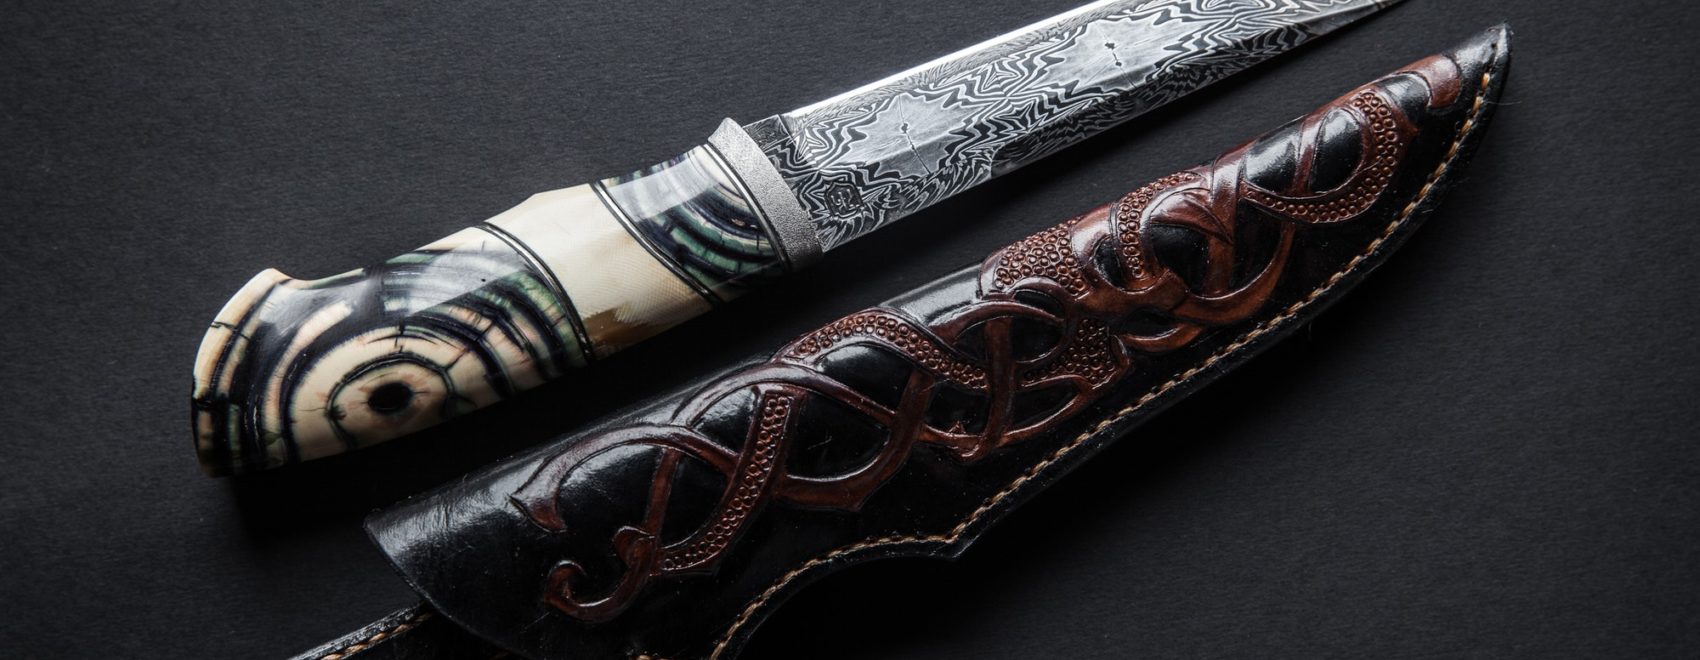 Hunter knife with wooden handle on a dark background